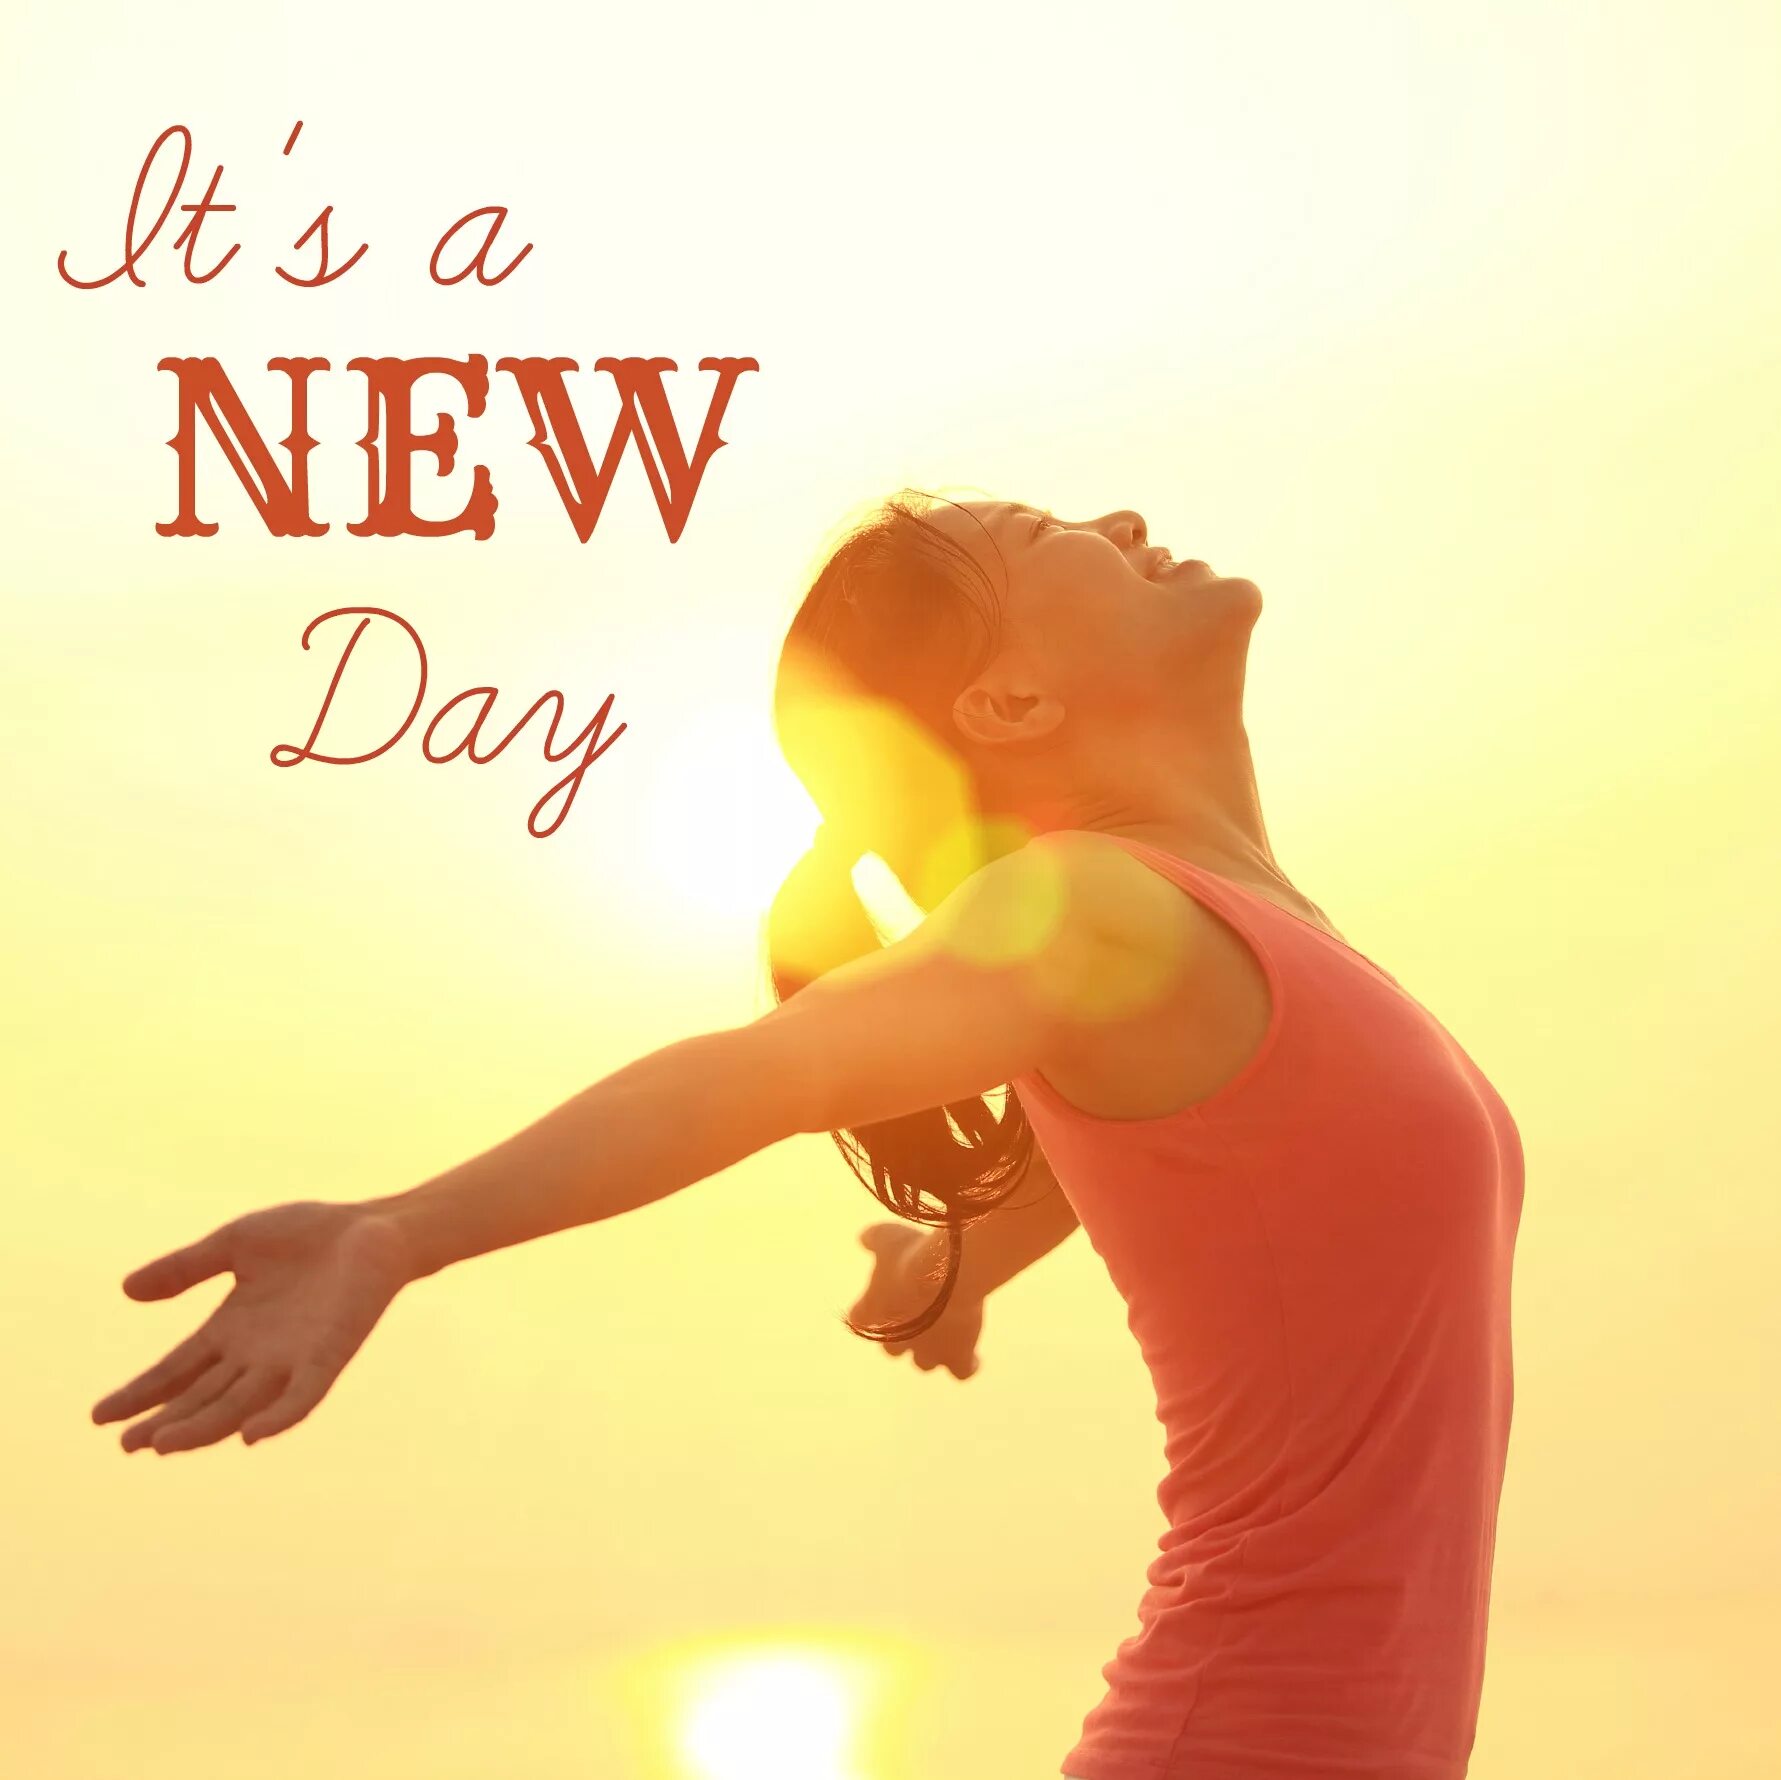 Start a new day. New week. New week New. Happy New Day картинки. It’s a New Day..